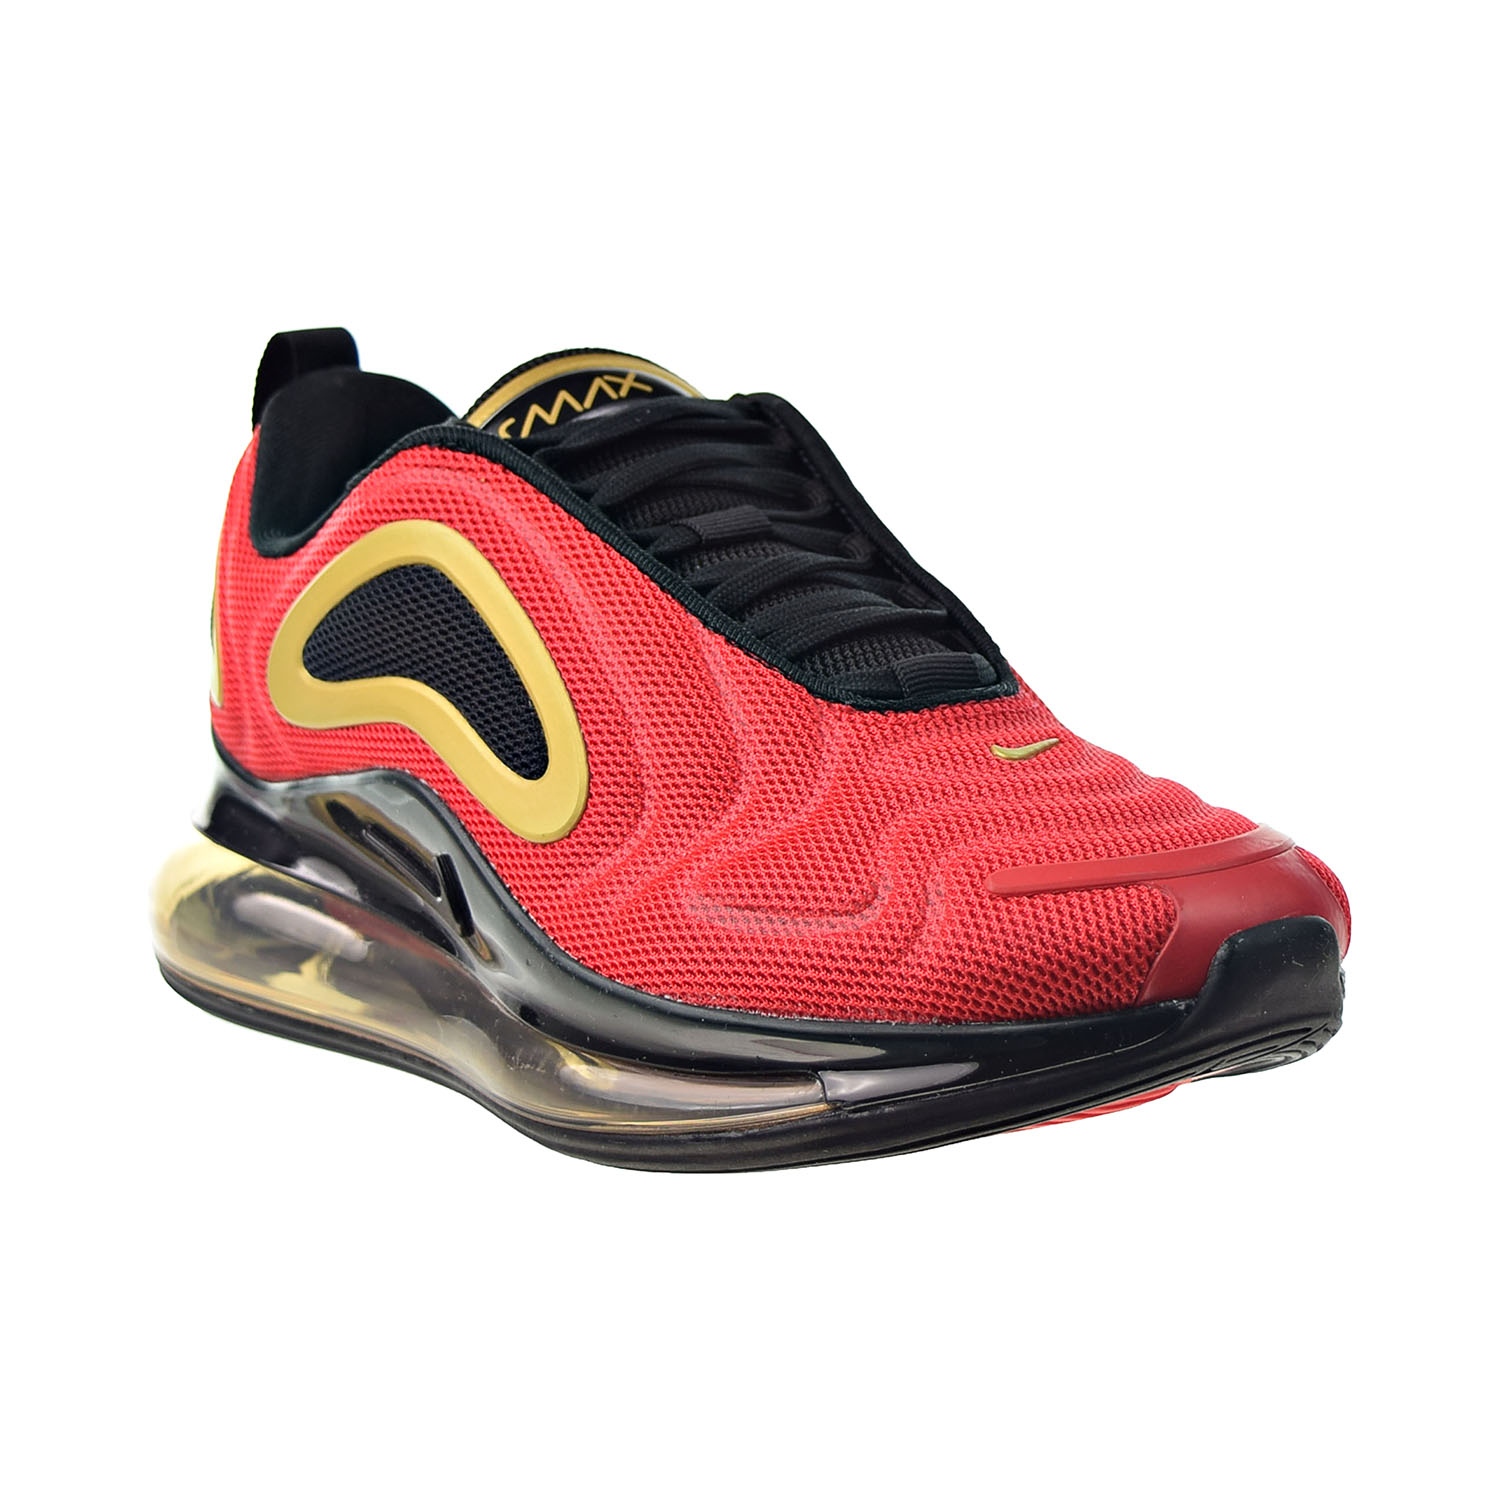 Nike Air Max 720 Women's Shoes University Red-Black cu4871-600 - image 2 of 6